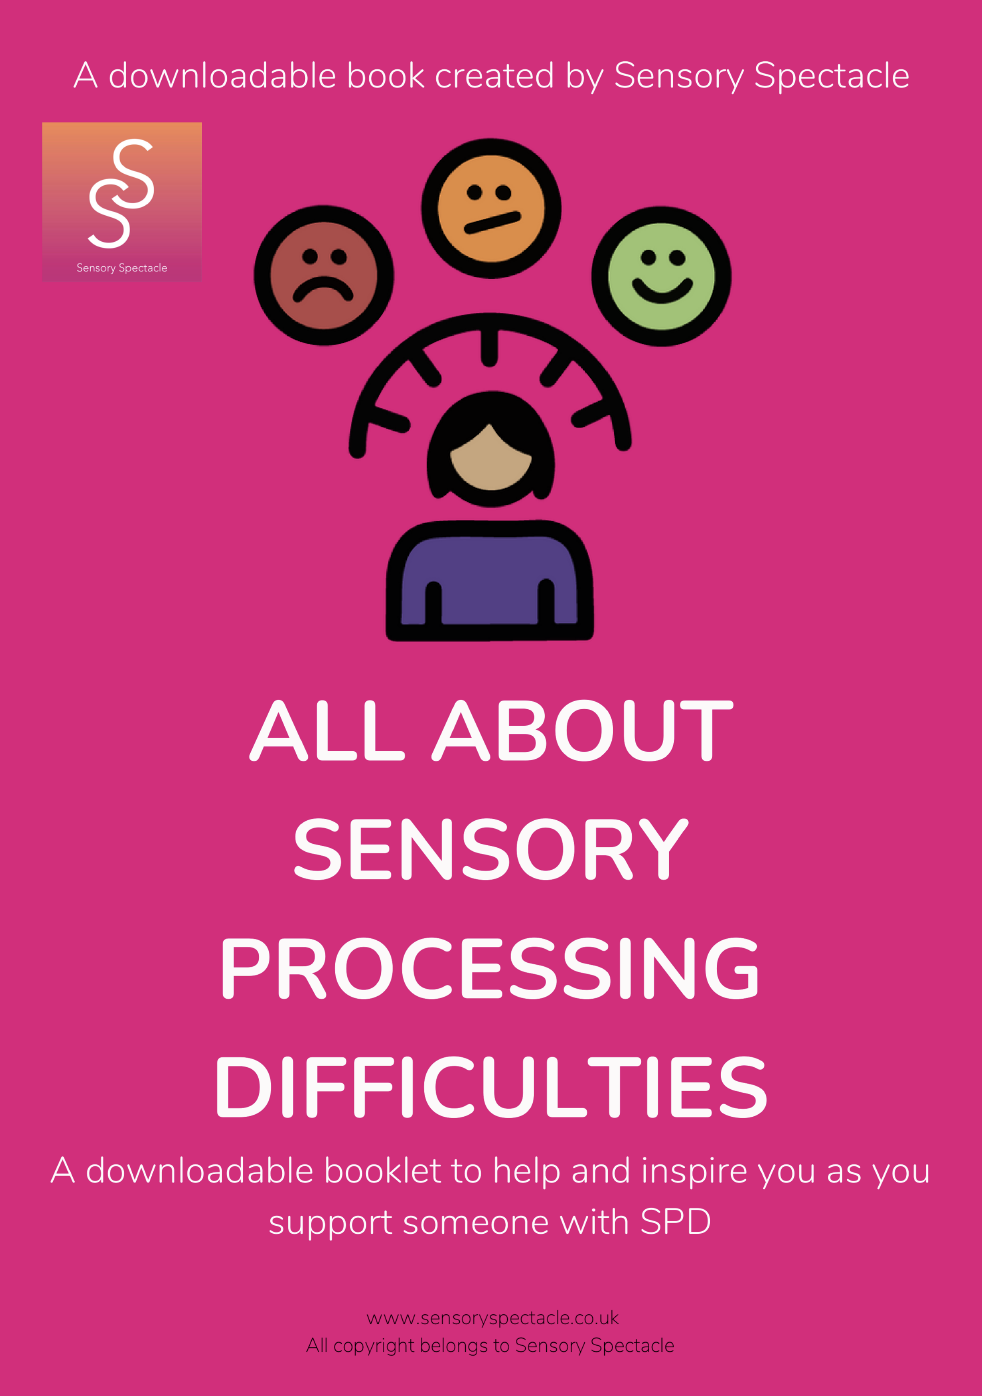 Front cover of a book created by Sensory Spectacle called All about Sensory processing difficulties. Pink background with an image of 3 faces, red sad, orange neutral expression and green happy face.